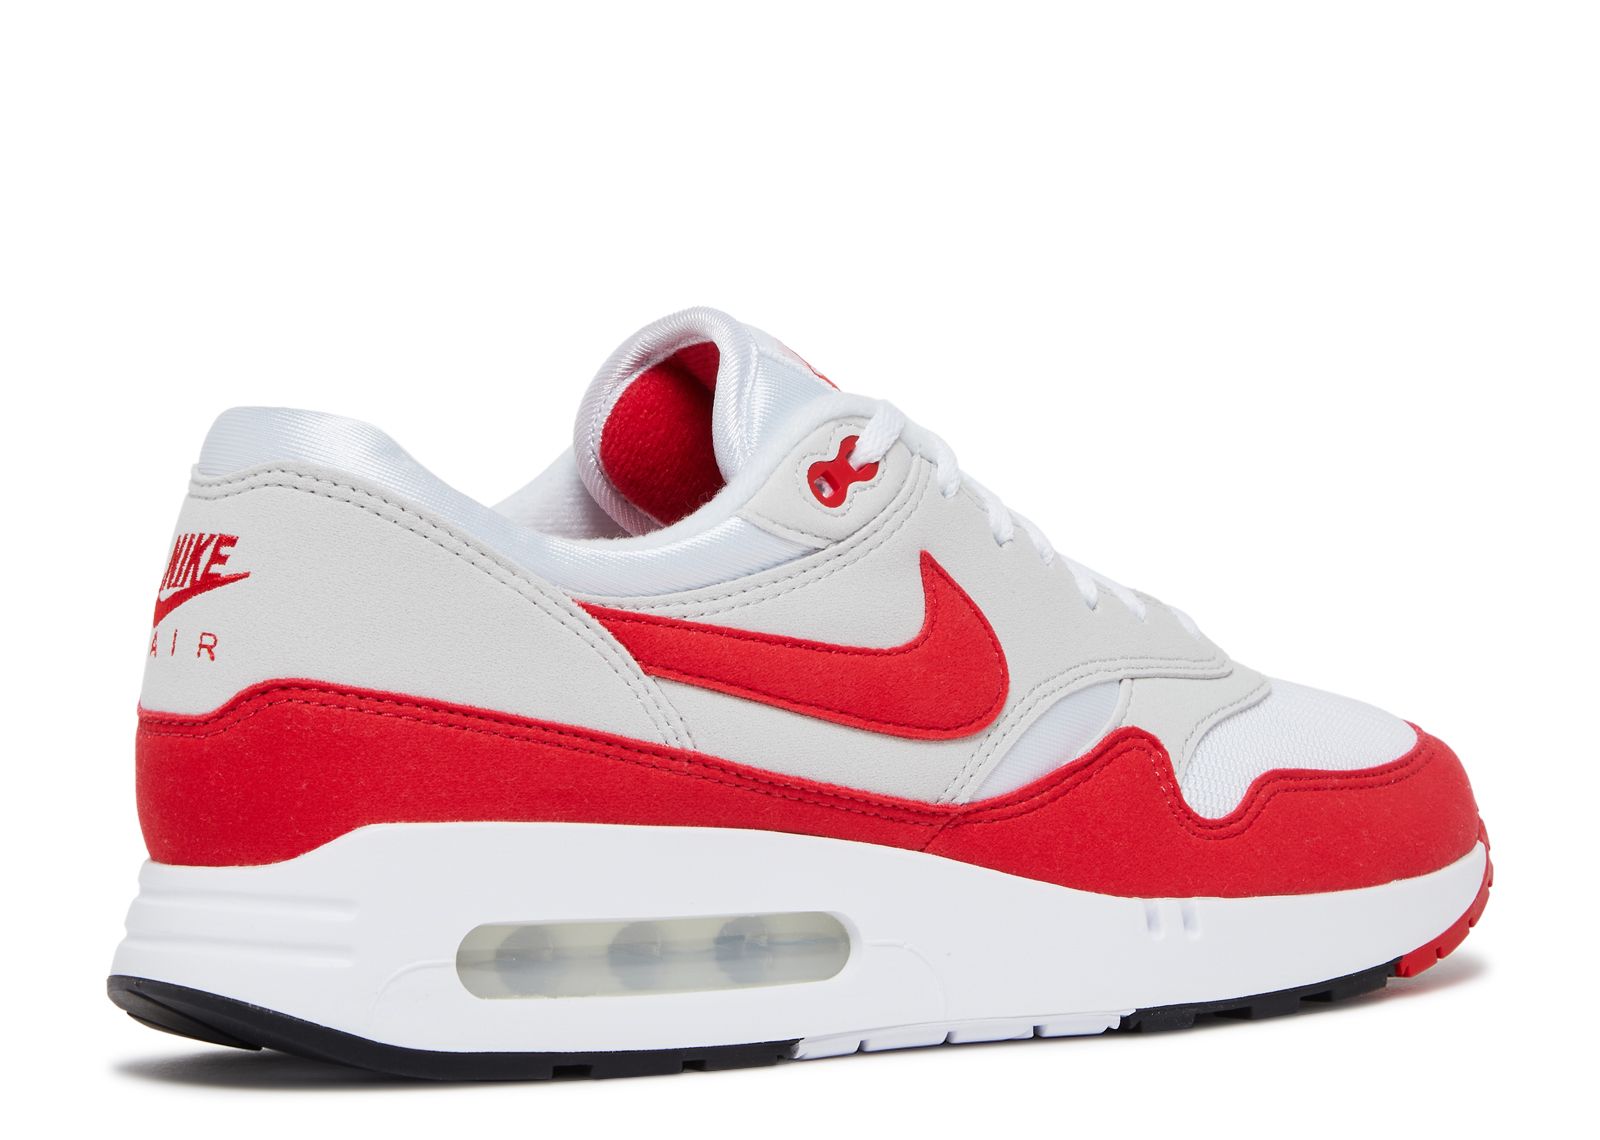 Air Max 1 '86 OG 'Big Bubble Red' - Nike - DQ3989 100 - white